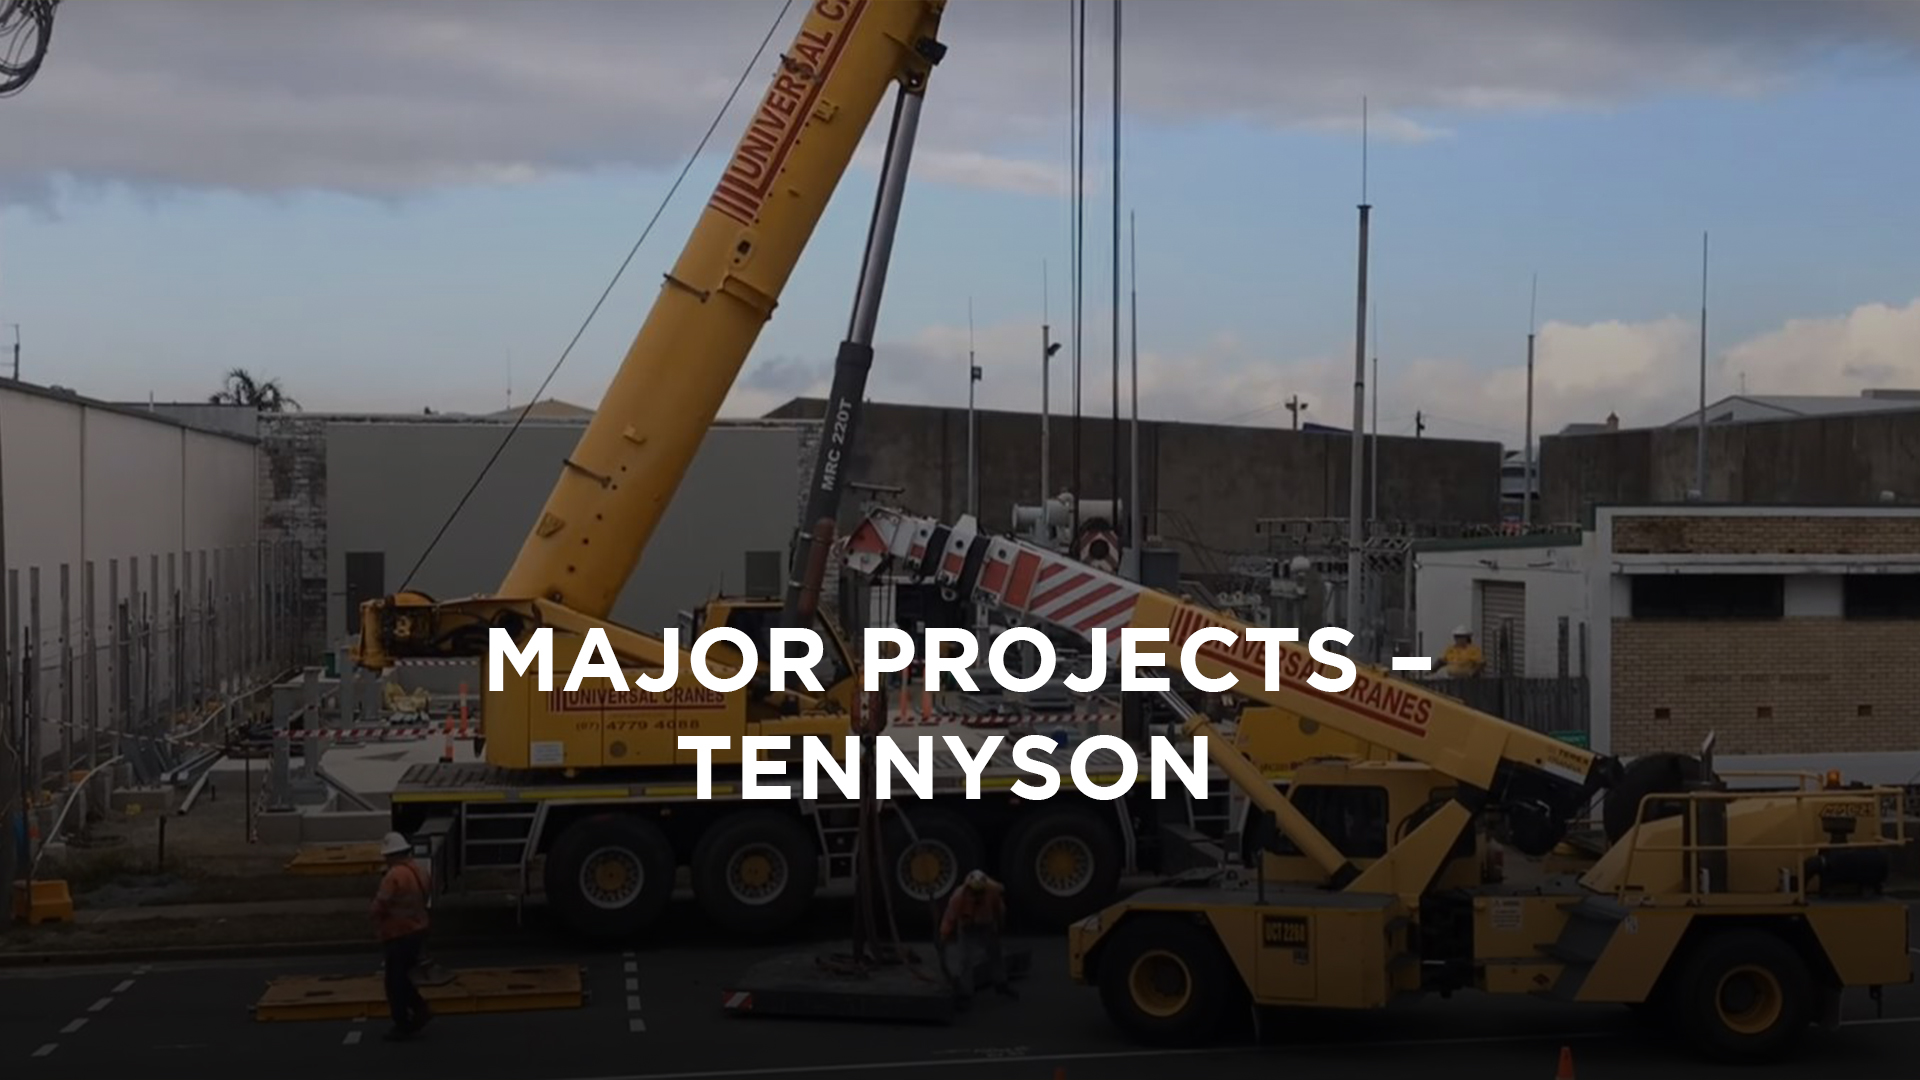 Crane and machinery on a construction site for major projects in Tennyson